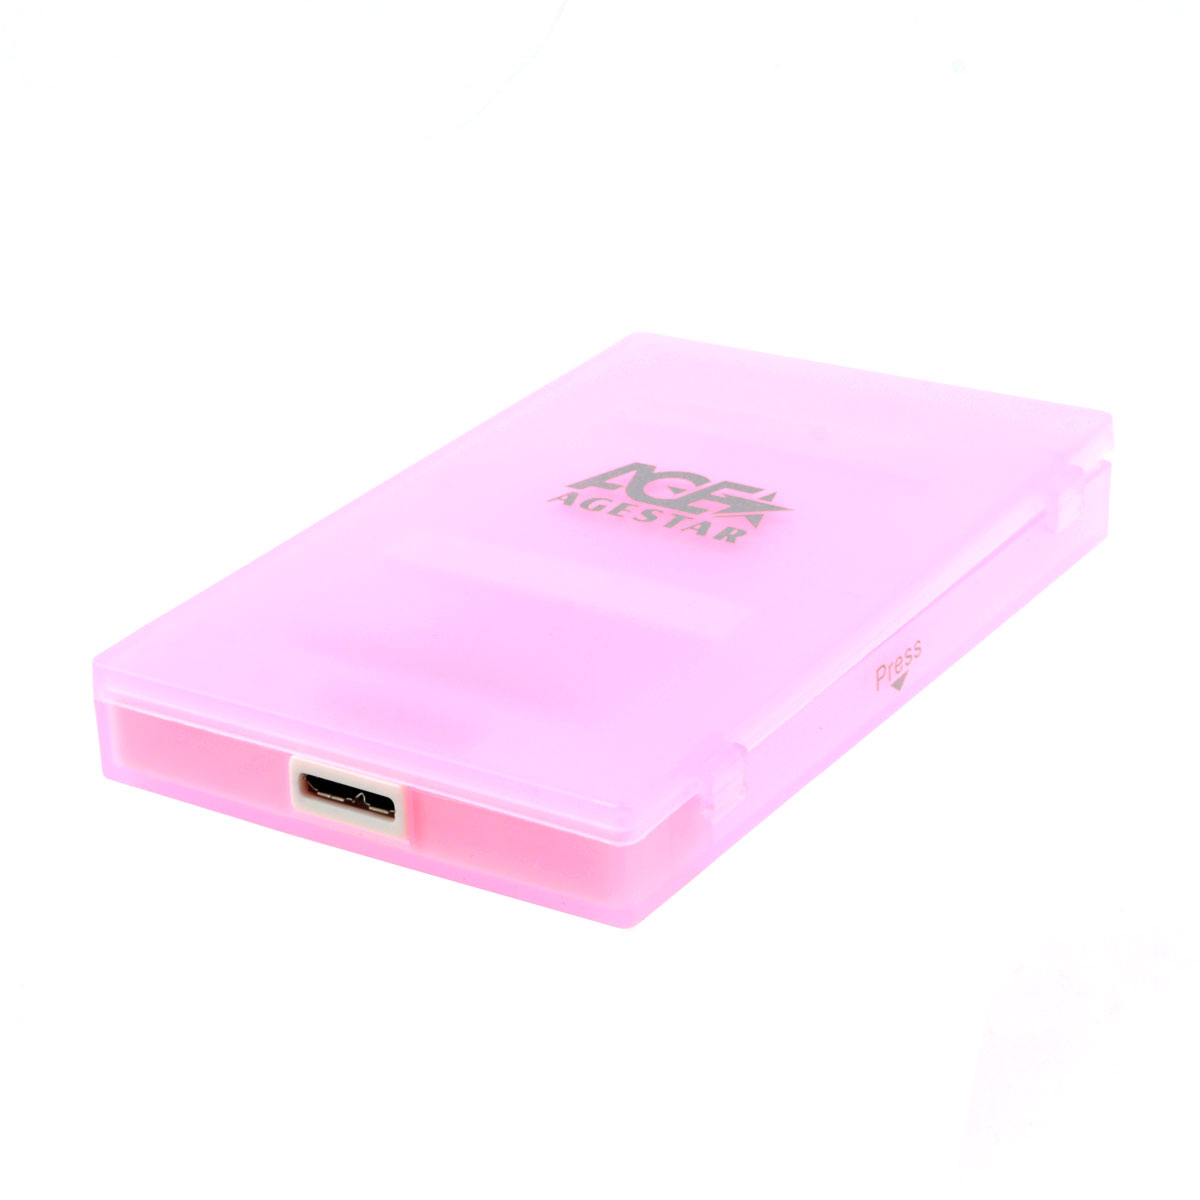 AgeStar 3UBCP1-6G (PINK)